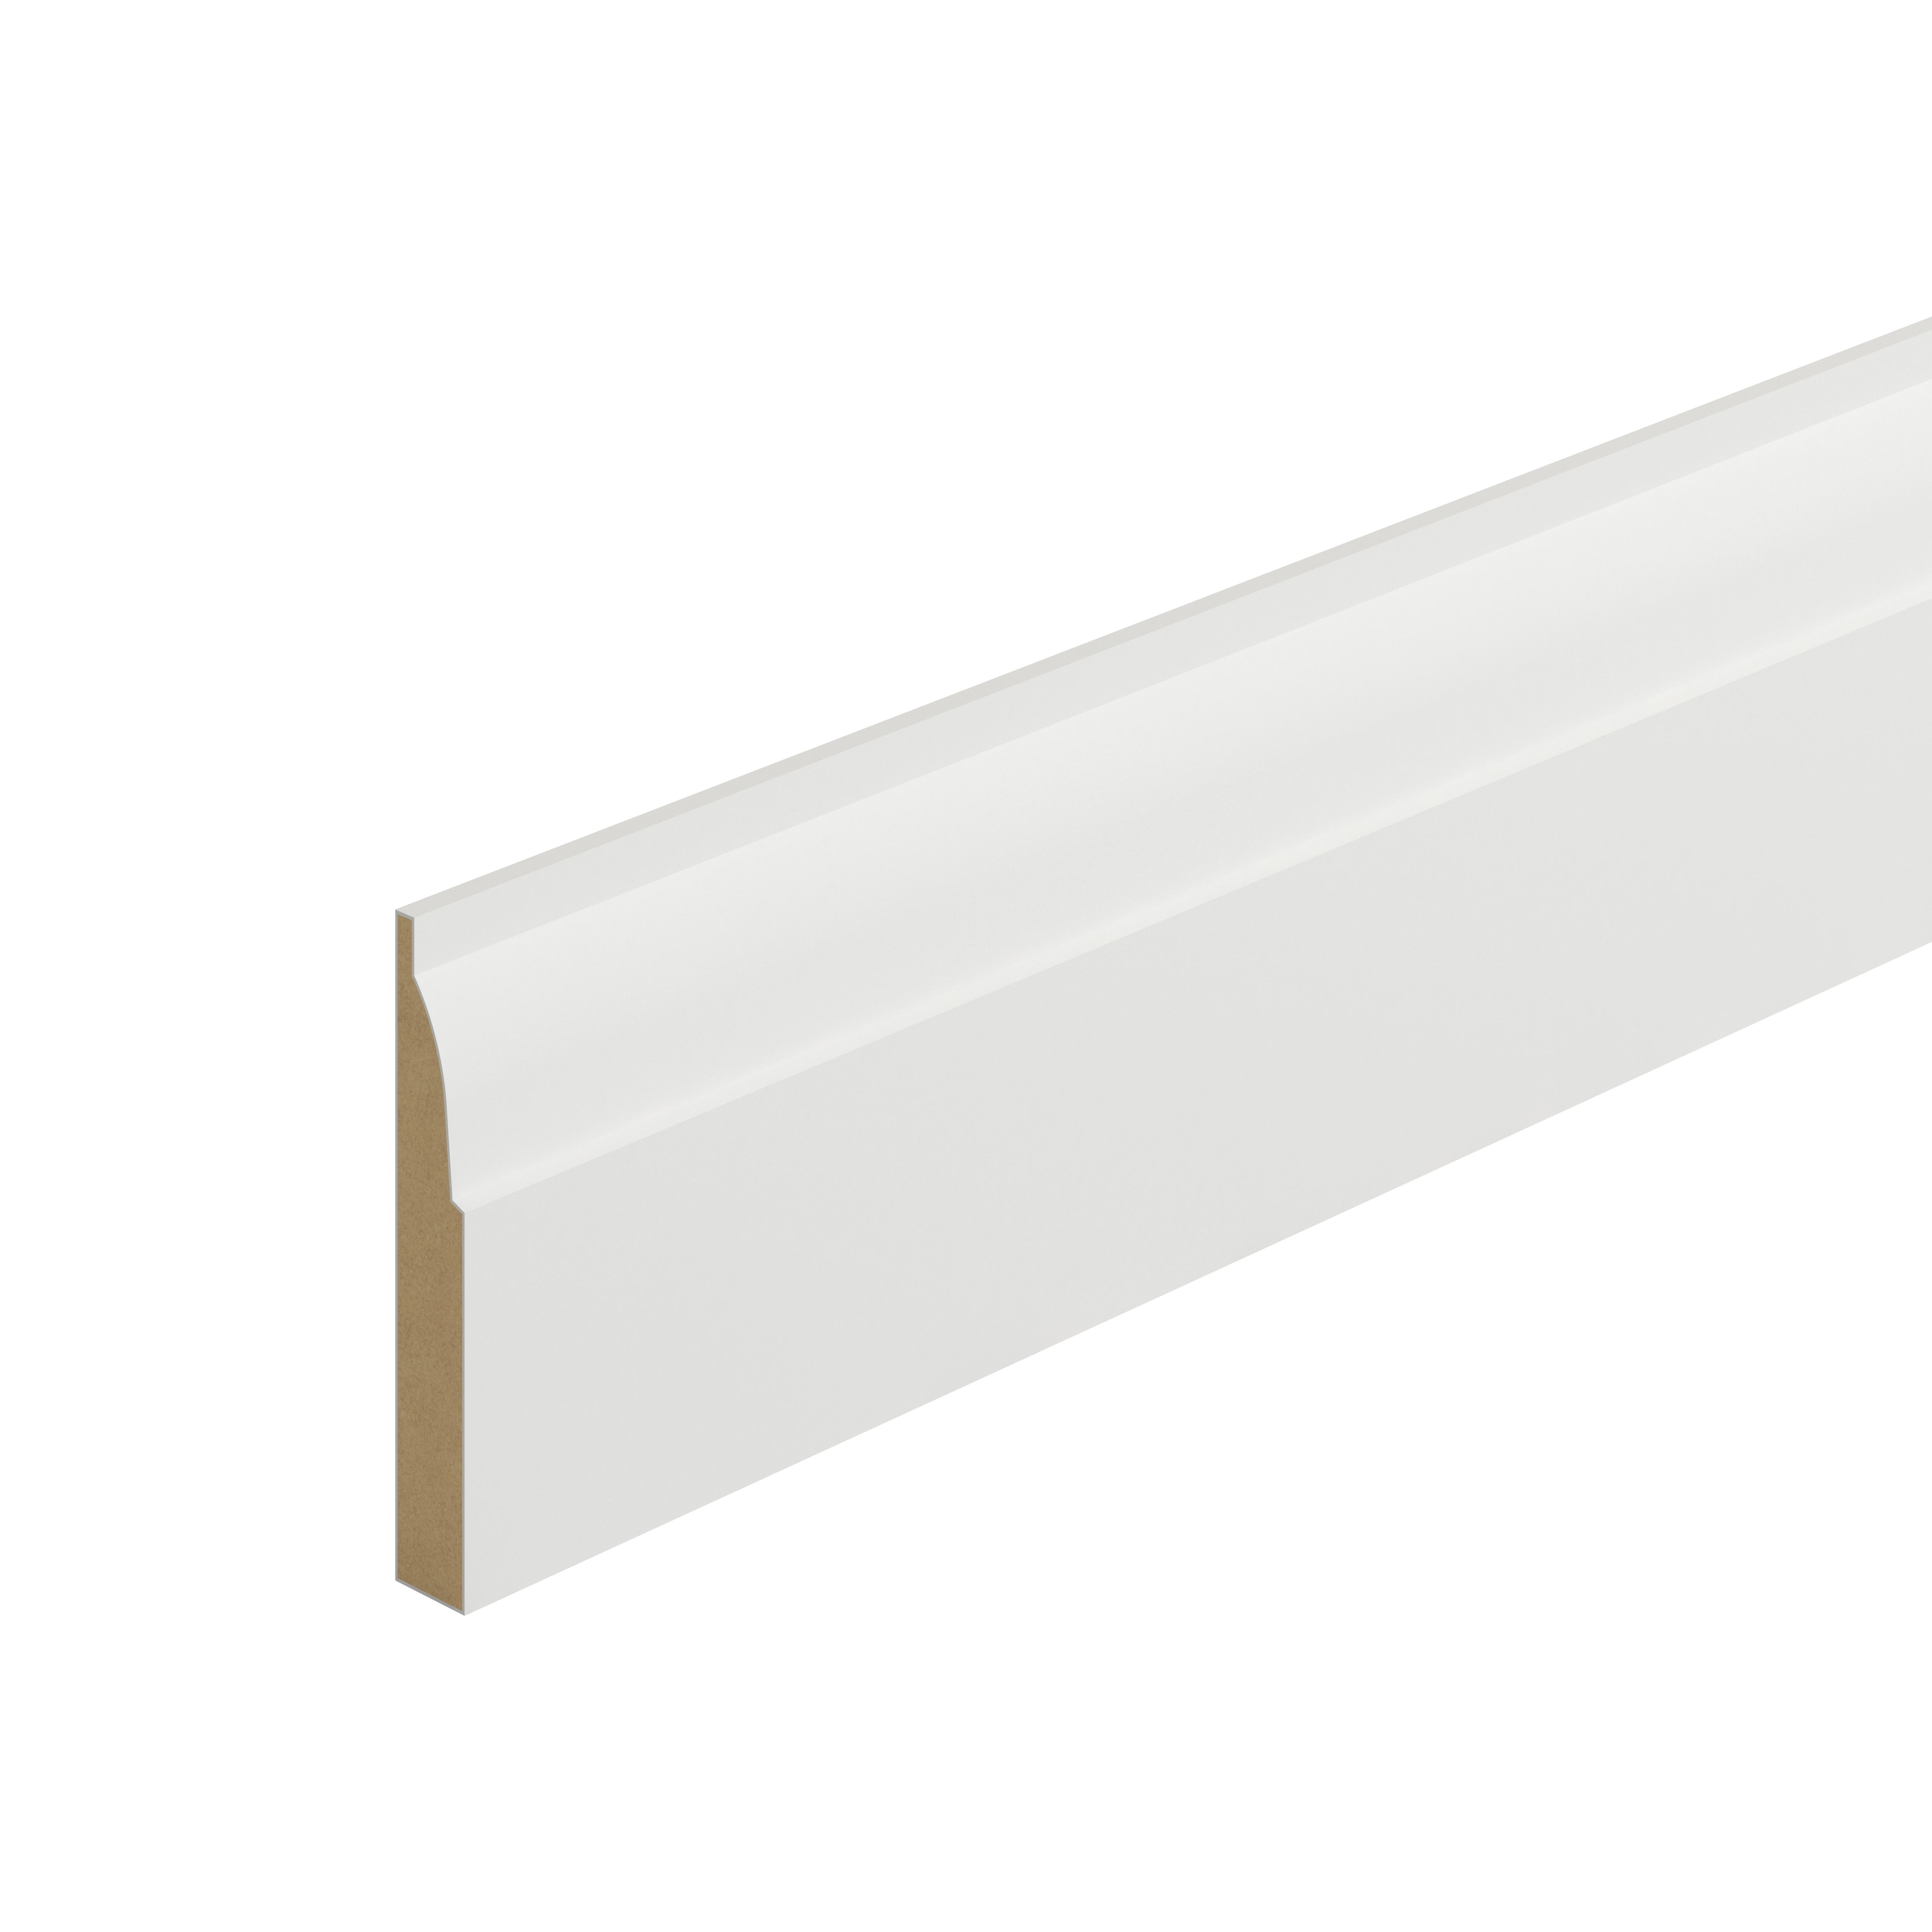 Metsä Wood Primed White MDF Ovolo Skirting board (L)2.4m (W)94mm (T)14.5mm, Pack of 4